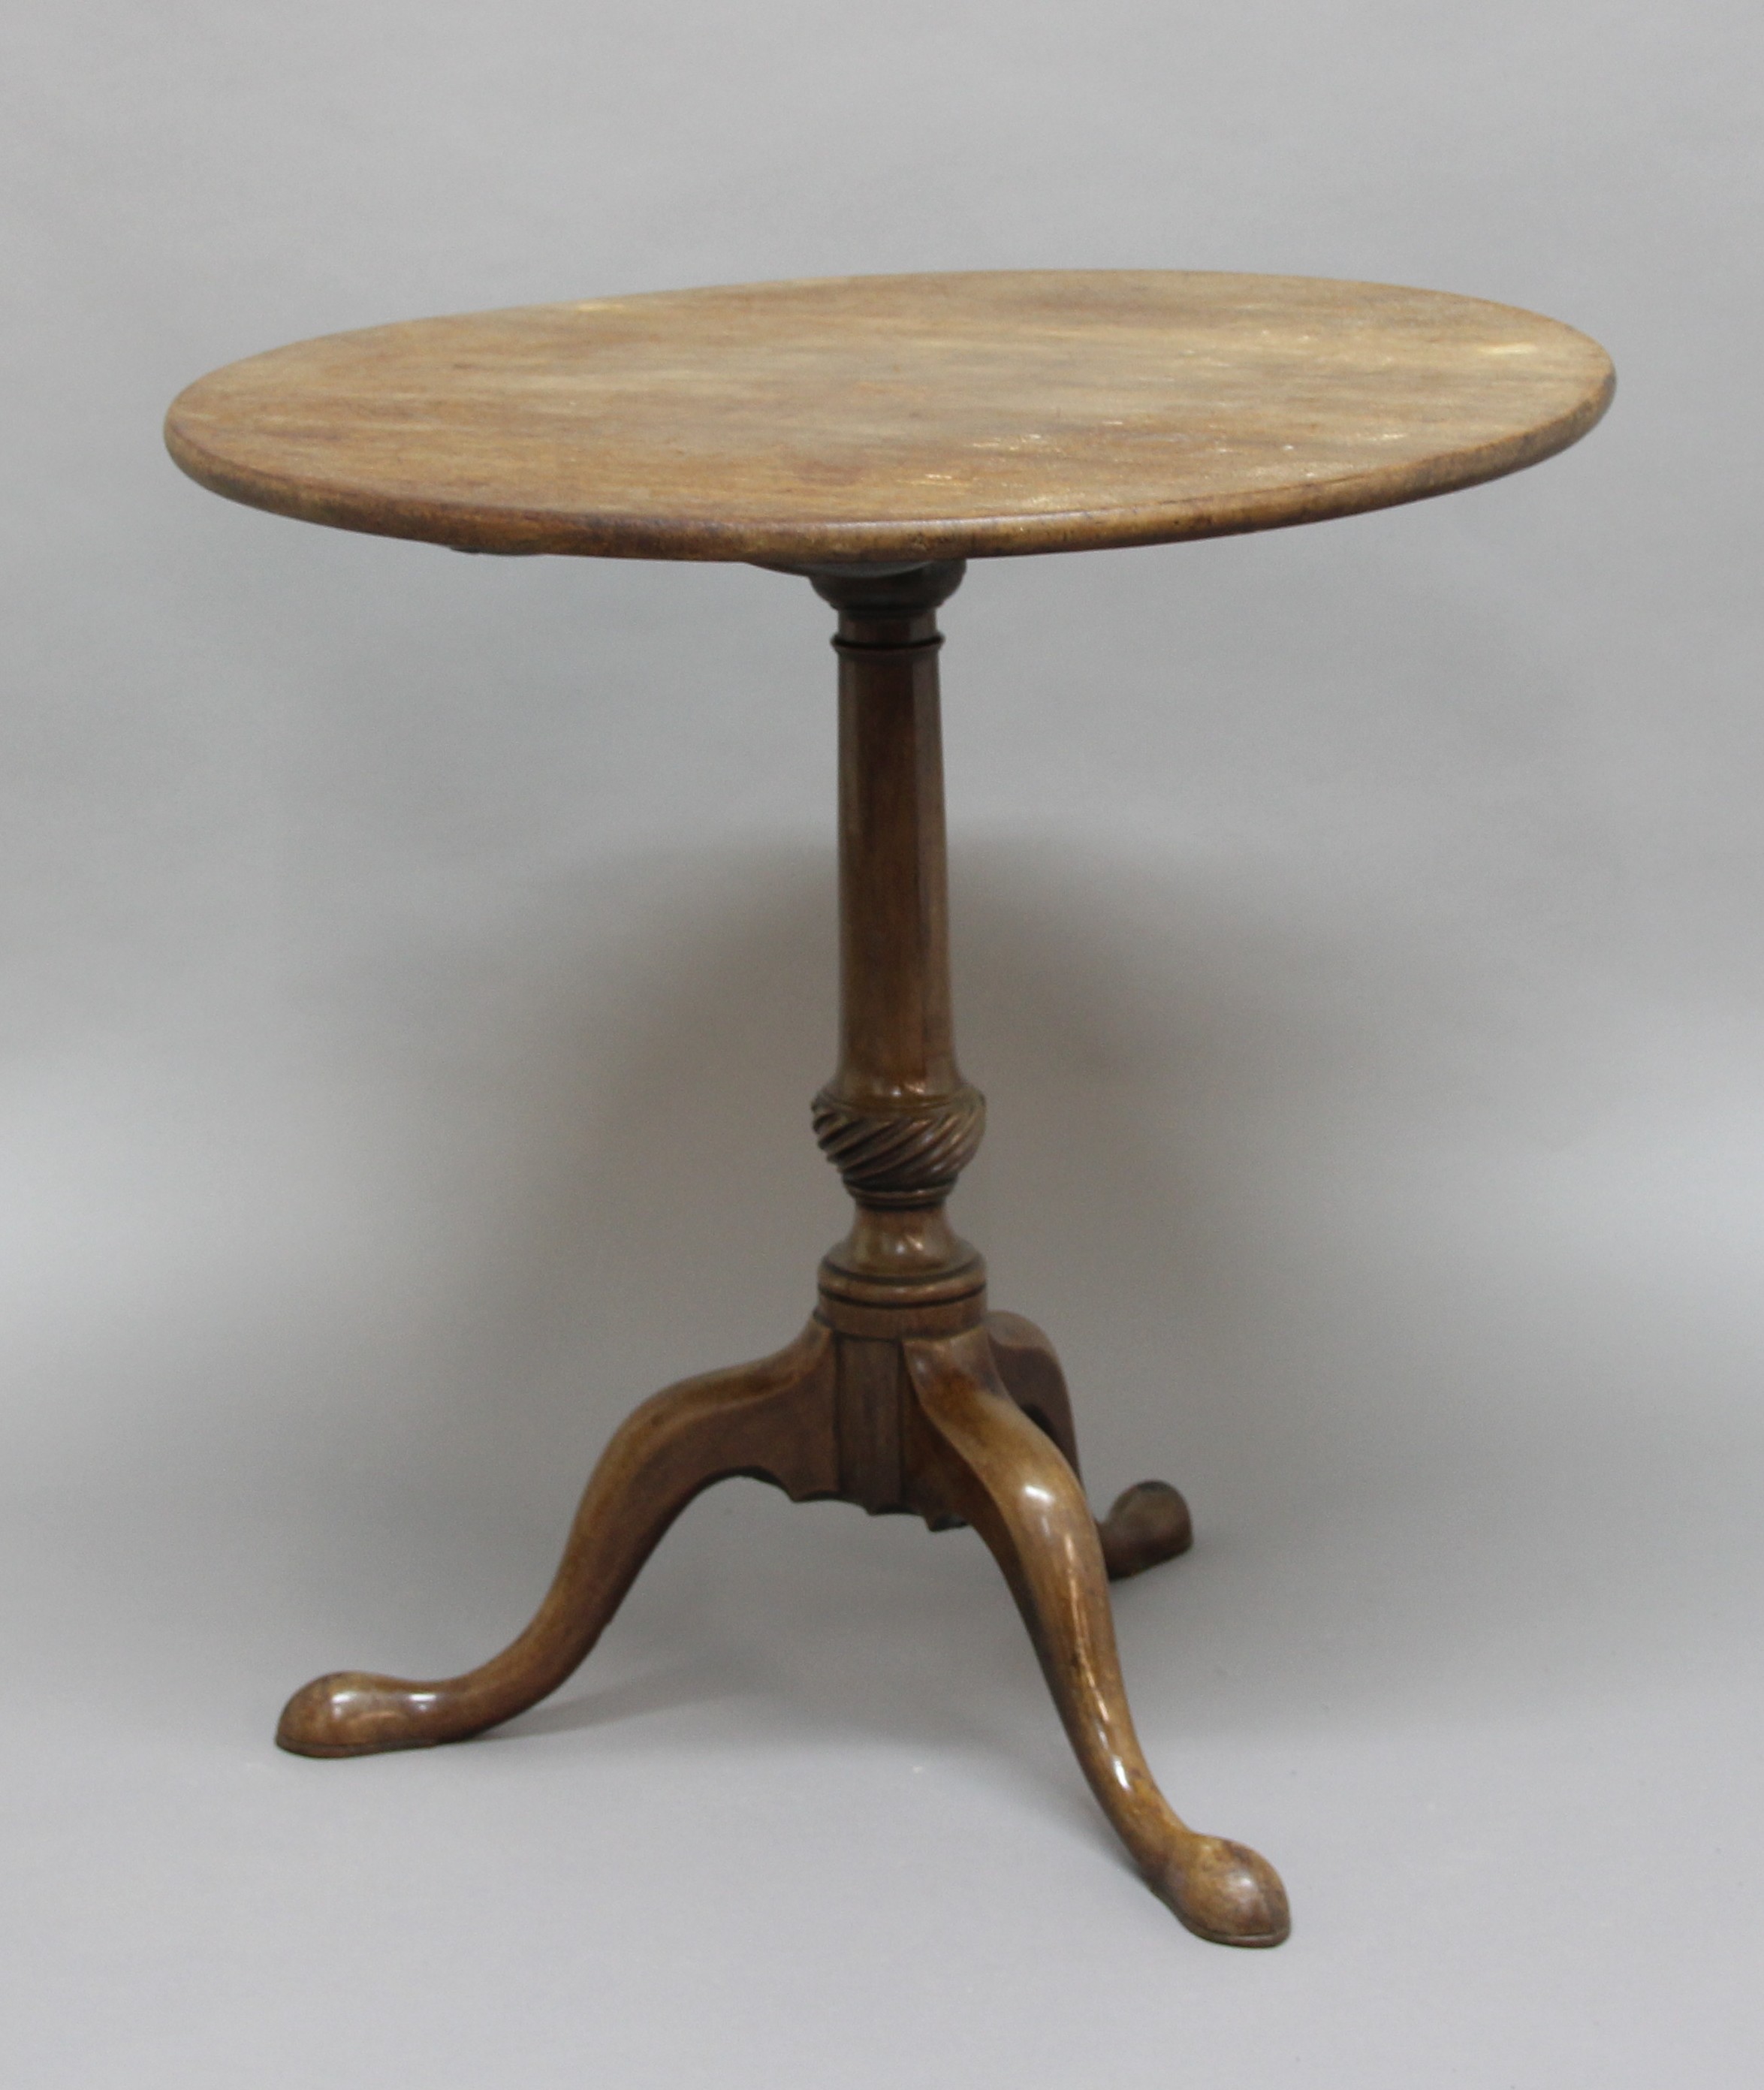 CIRCULAR MAHOGANY TILT-TOP TABLE, 19th century, on turned column and three outswept legs, height